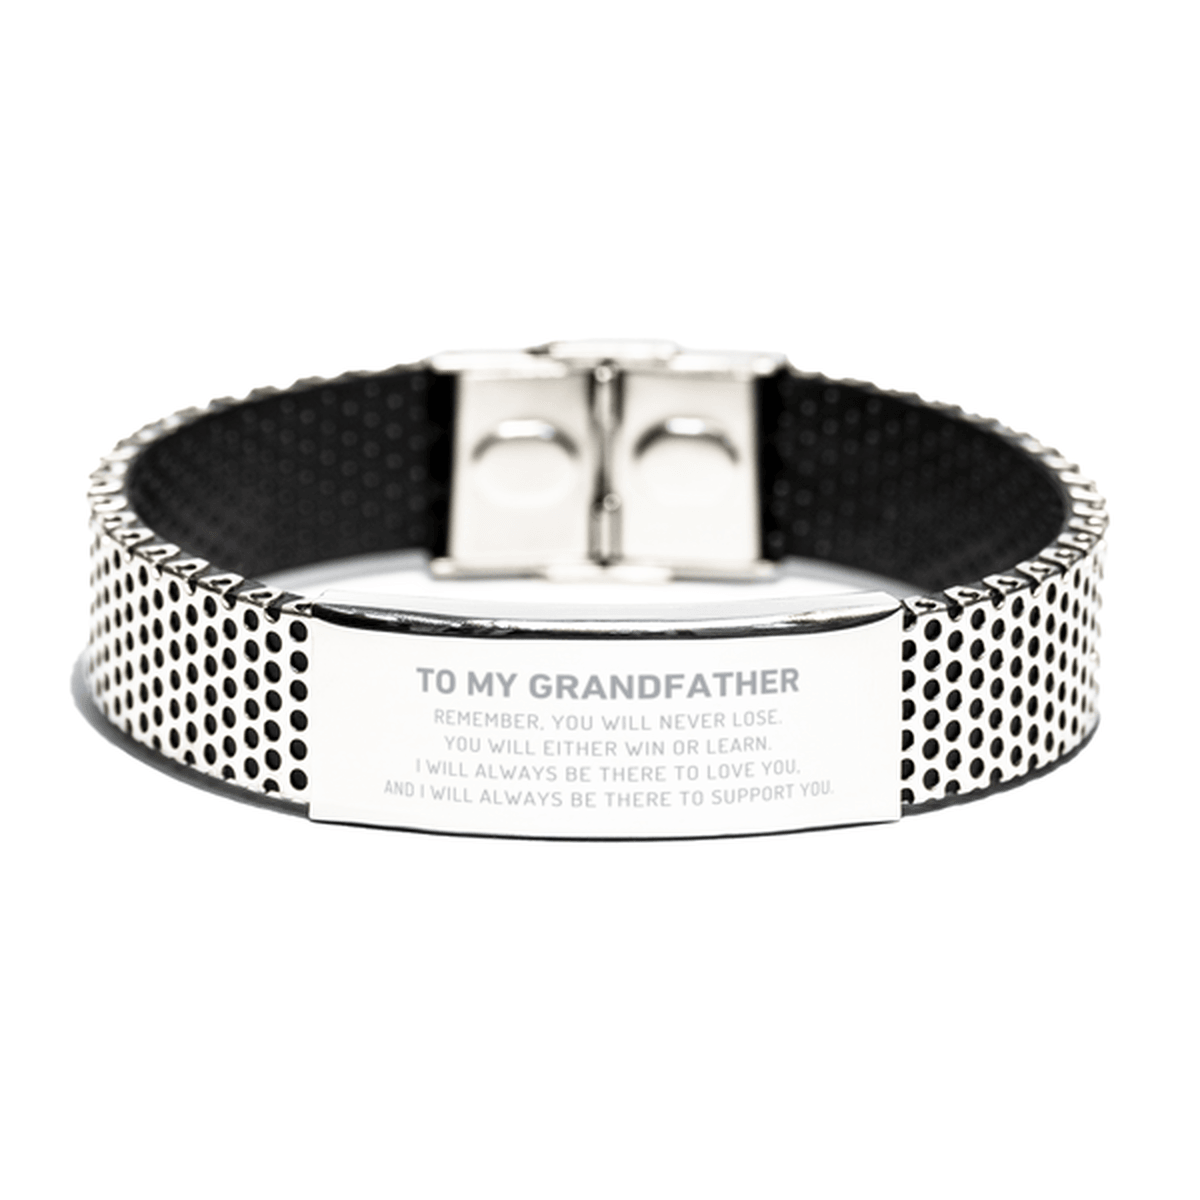 Grandfather Gifts, To My Grandfather Remember, you will never lose. You will either WIN or LEARN, Keepsake Stainless Steel Bracelet For Grandfather Engraved, Birthday Christmas Gifts Ideas For Grandfather X-mas Gifts